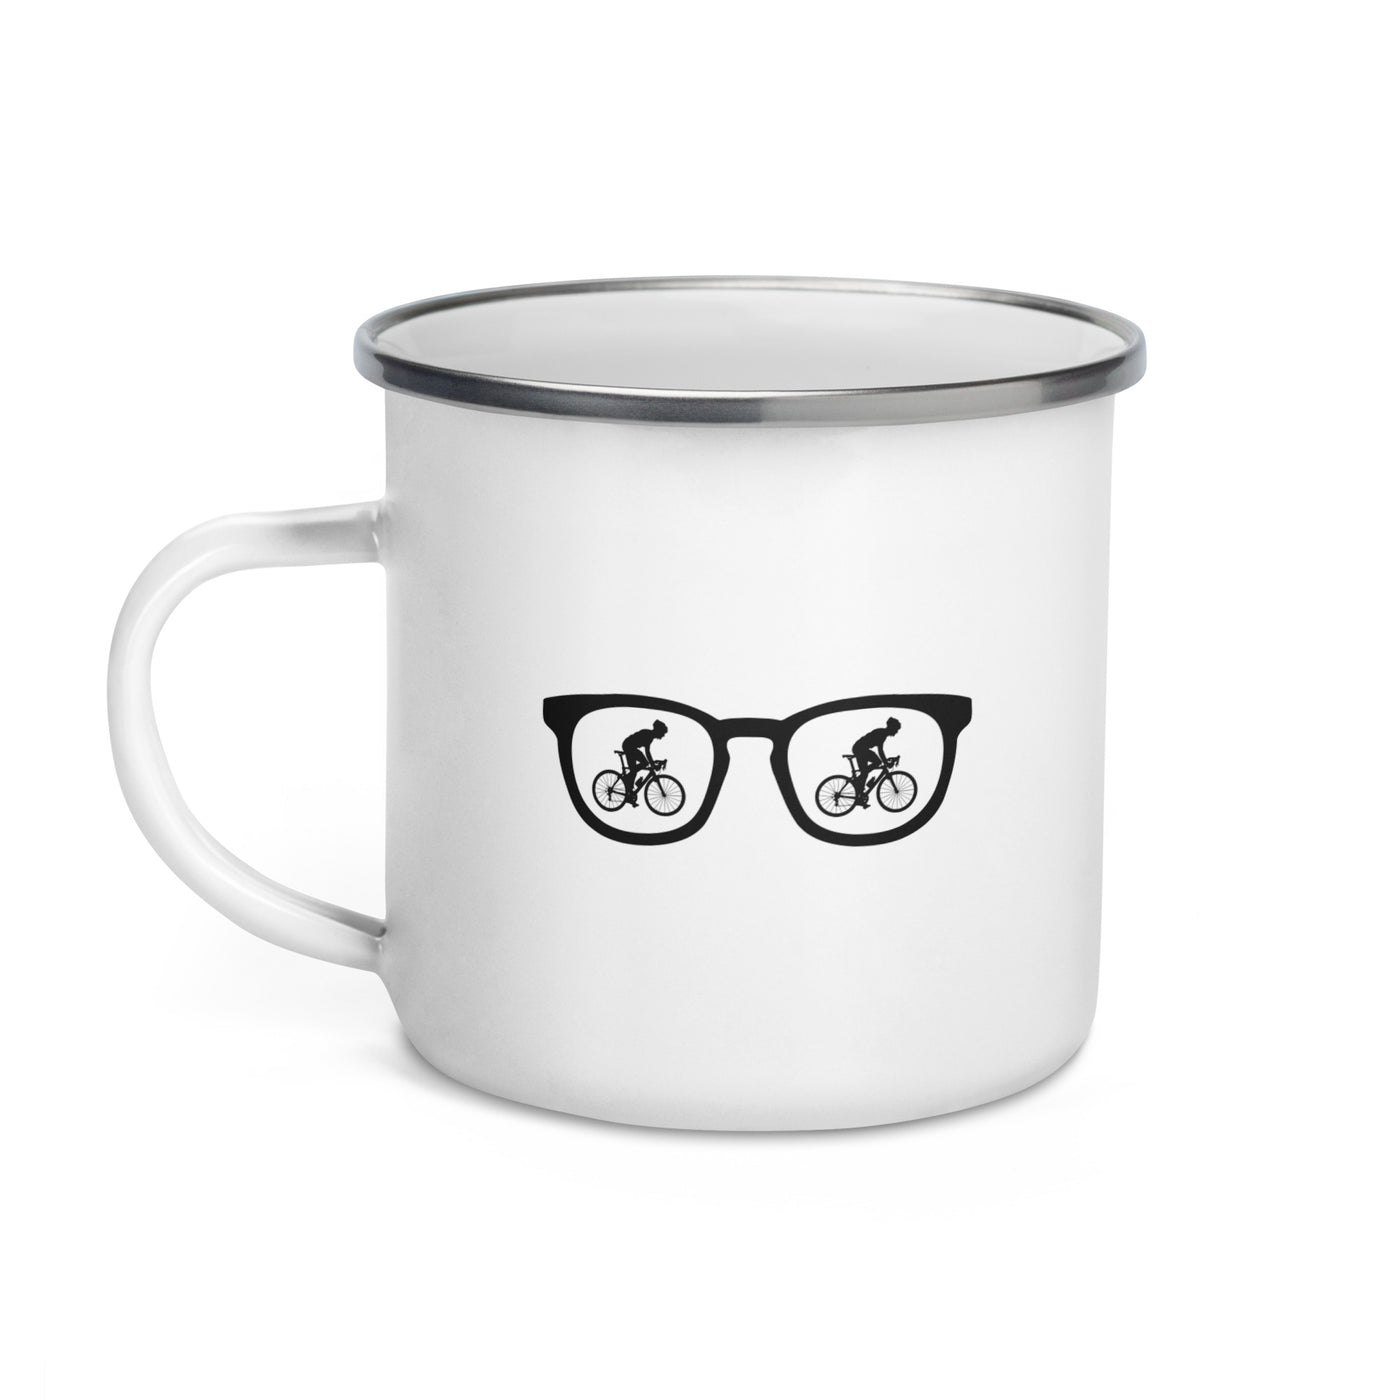 Sunglasses And Cycling 1 - Emaille Tasse fahrrad